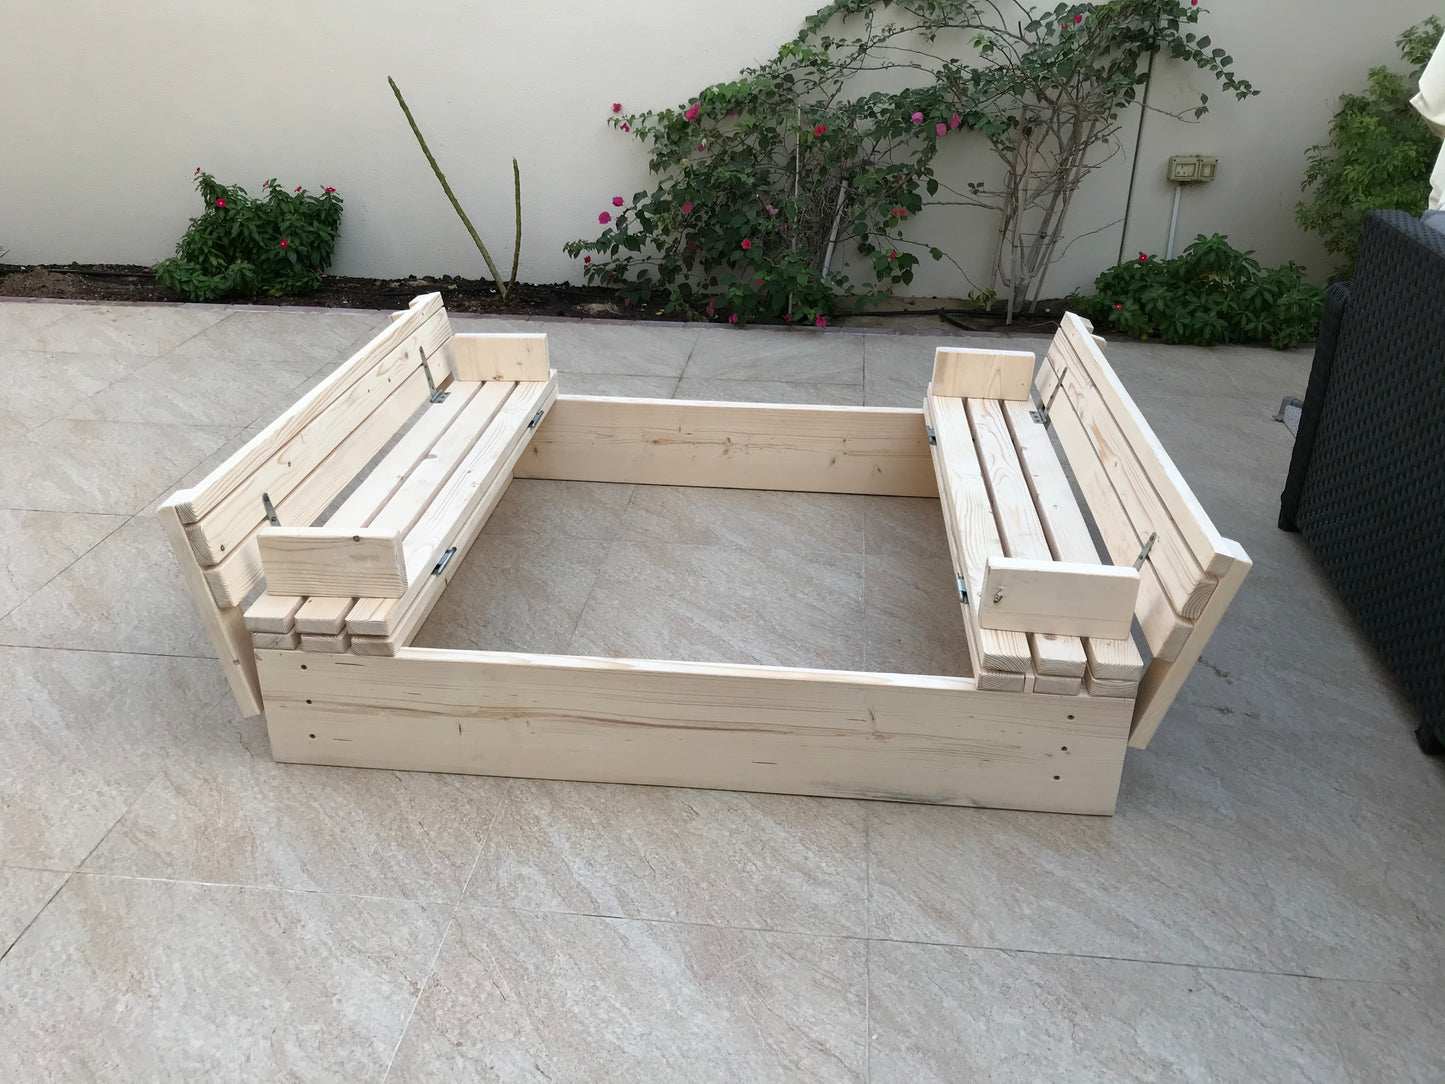 Wooden sand pit bench